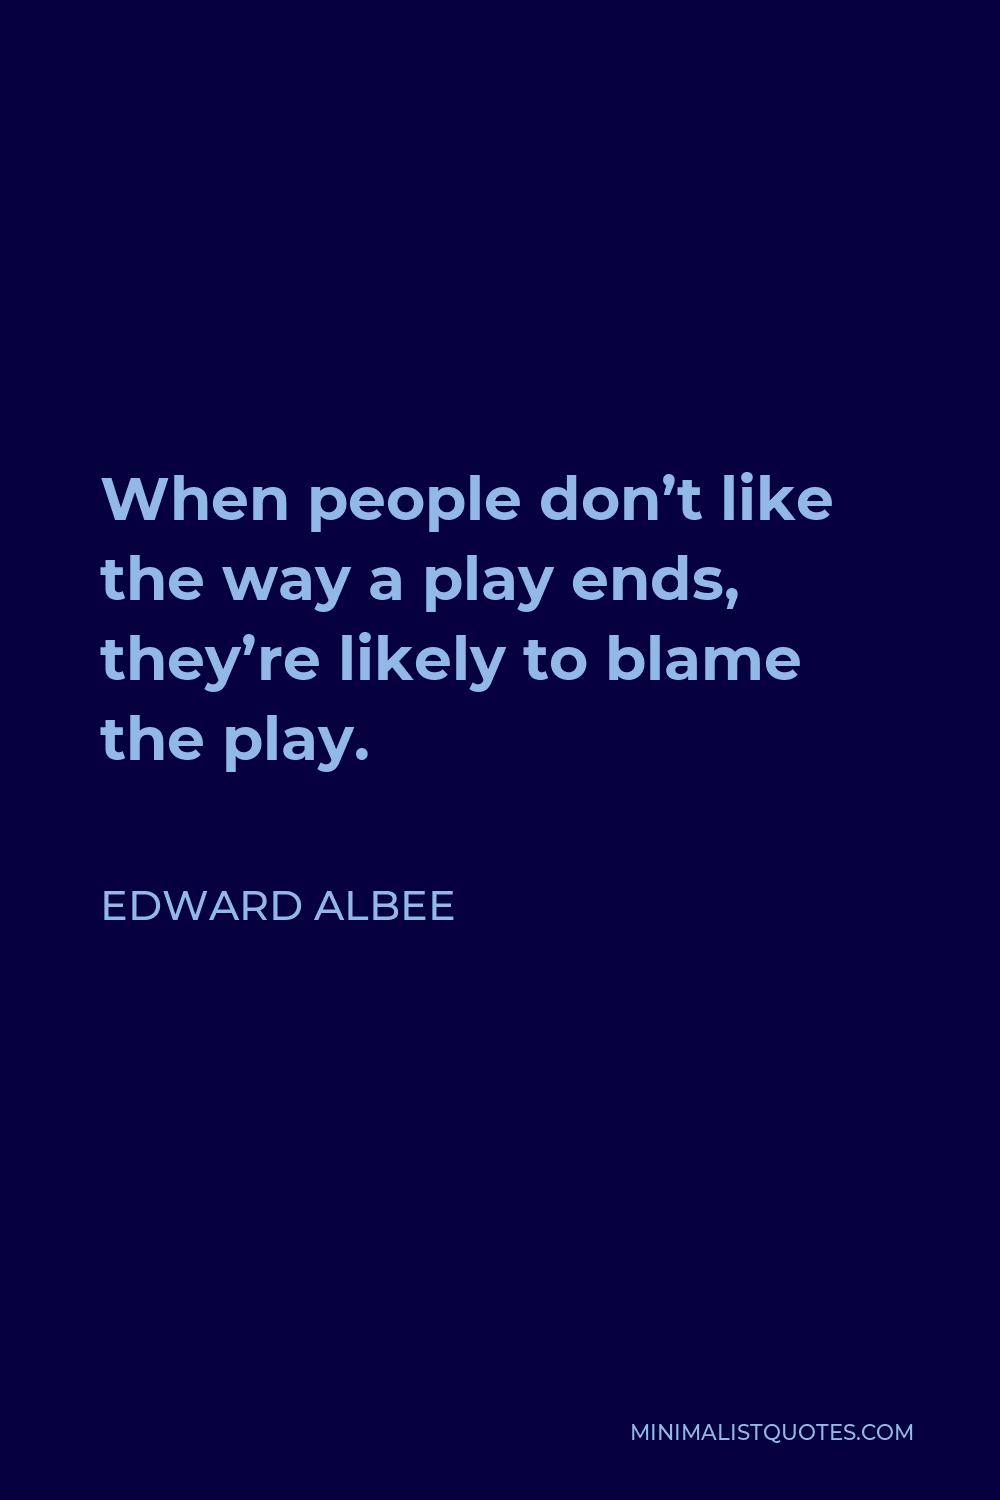 Edward Albee Quote - When people don’t like the way a play ends, they’re likely to blame the play.